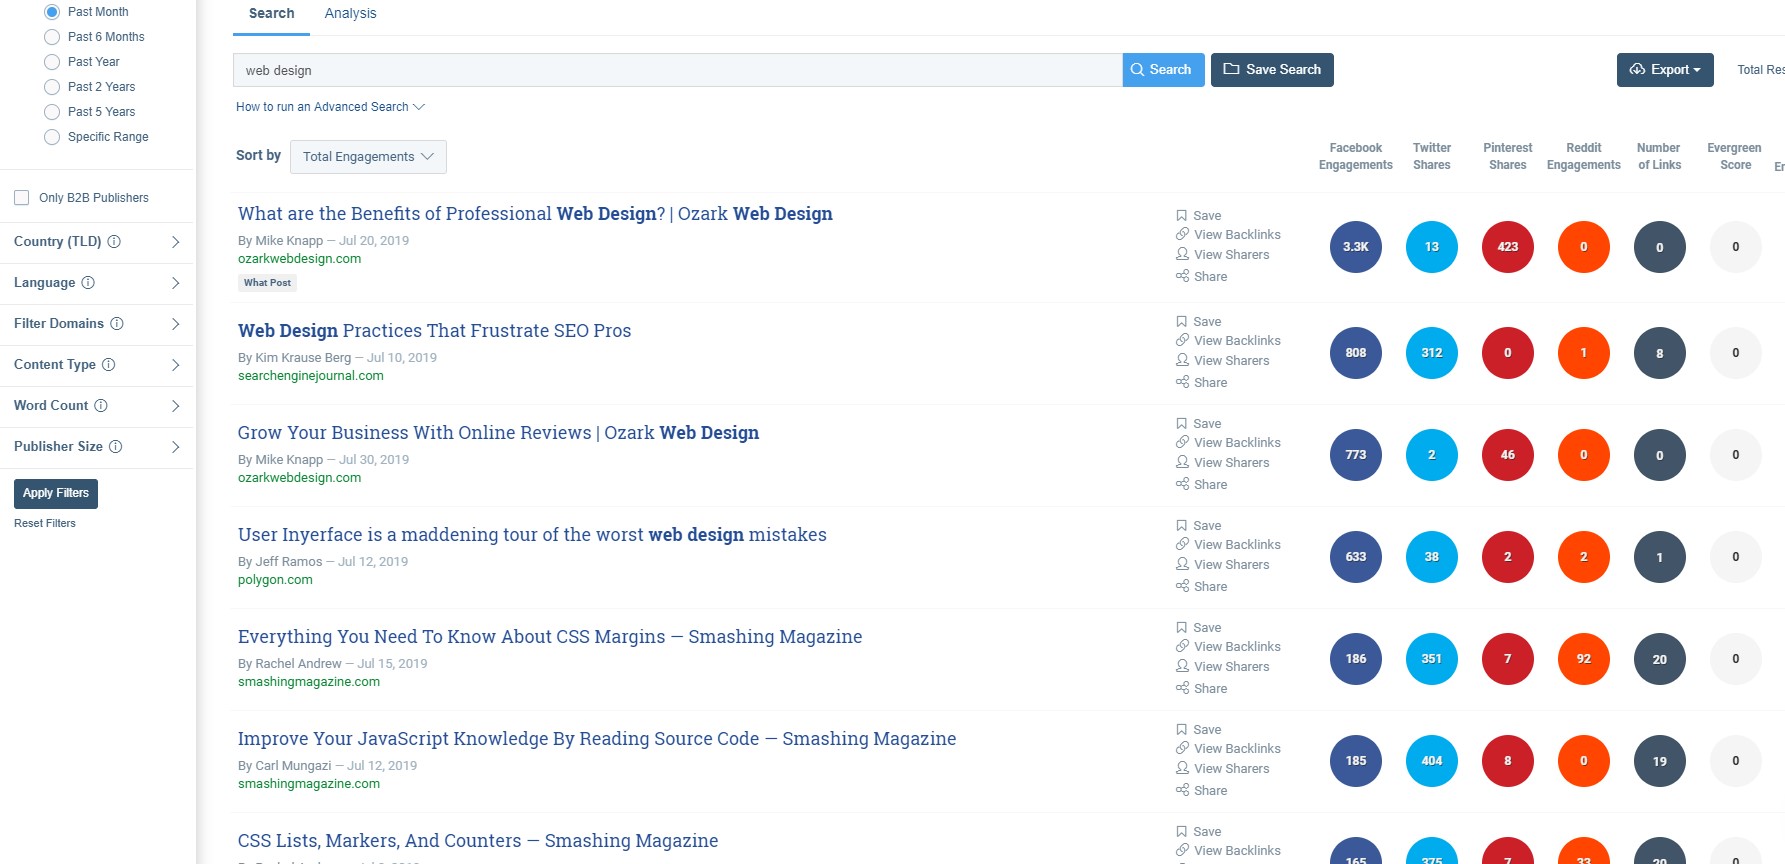 Trend Insight on Web Design Services Keyword in Buzzsumo Tool